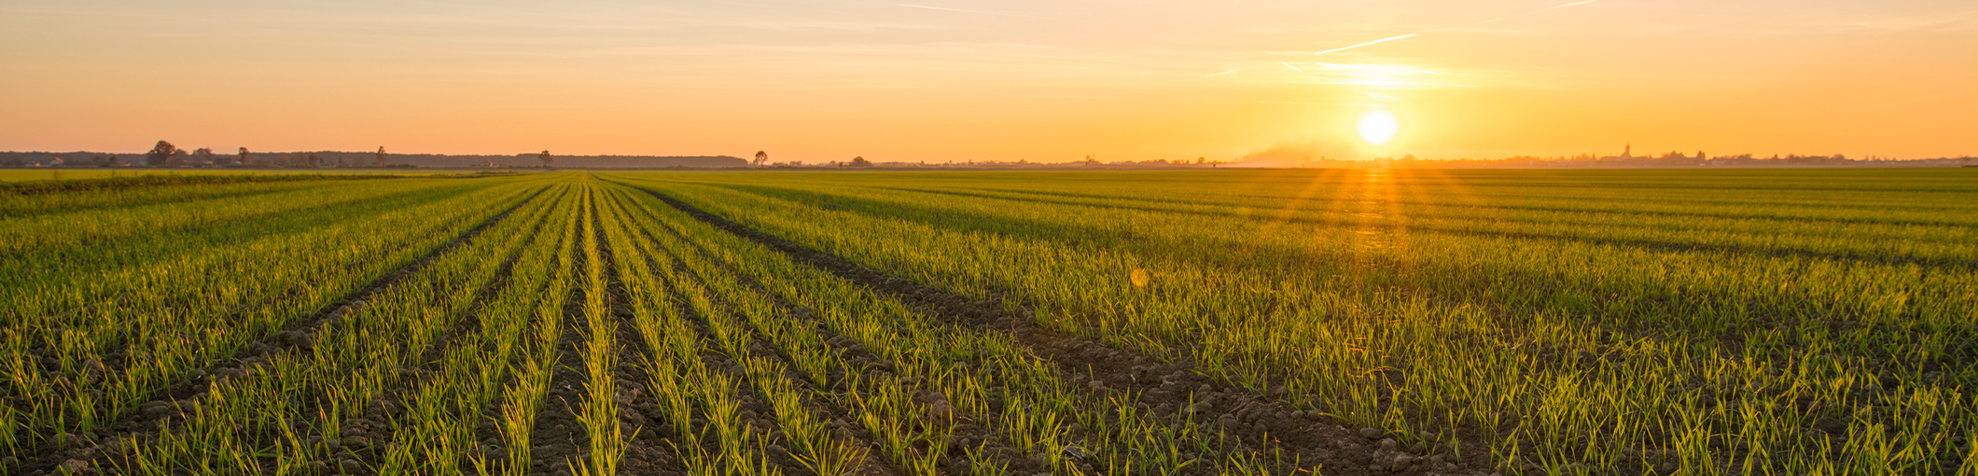 Field of crops at sunrise